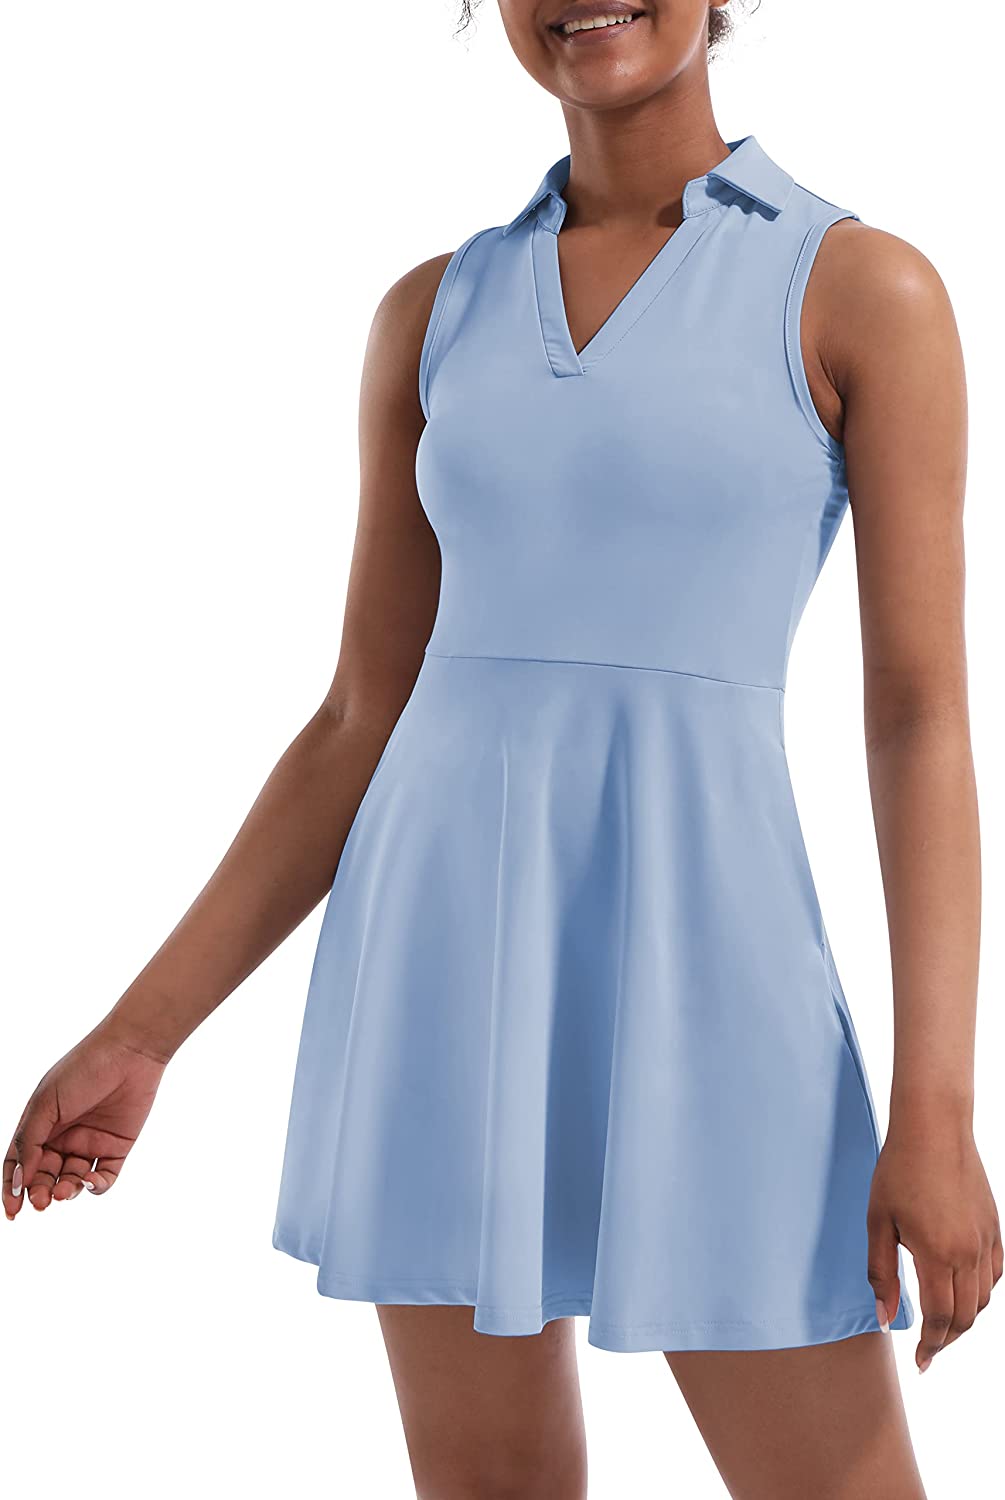 Fengbay Tennis Dress for Women,Golf Dresses with Built in Shorts